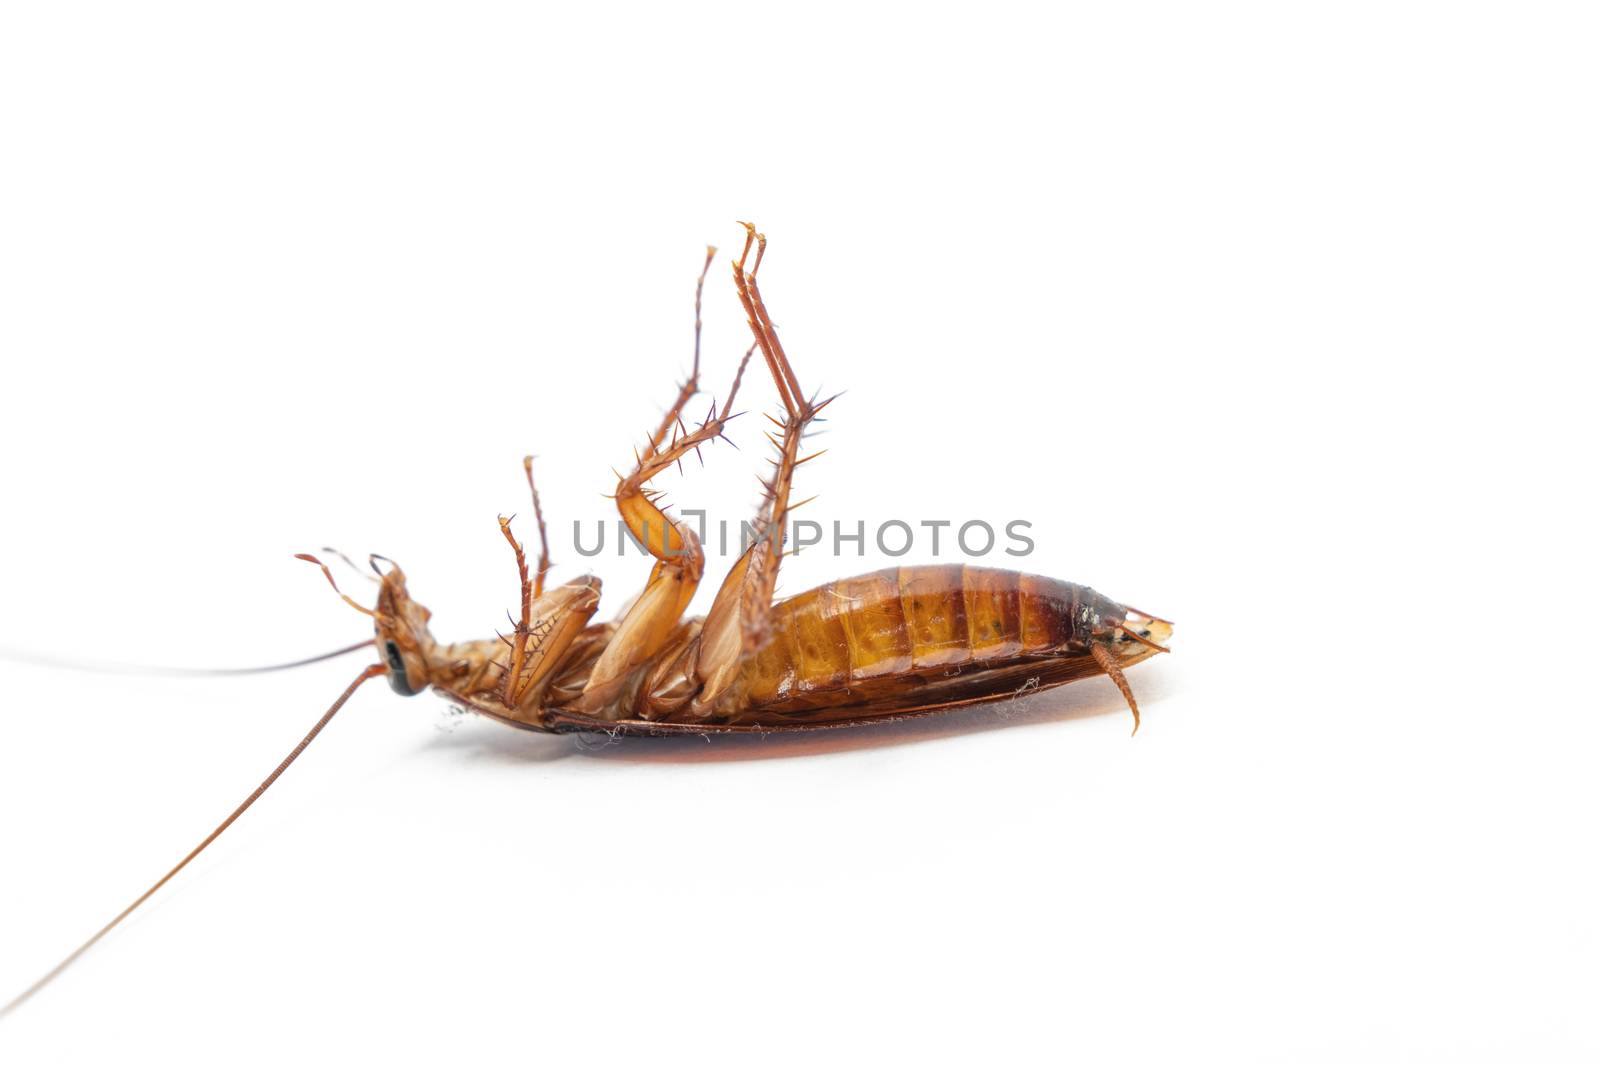 Dead cockroach on white background, Concept the problem in the house because of cockroaches living in the kitchen and pest control, using poisonous spray to kill cockroach at home, Top view by peerapixs